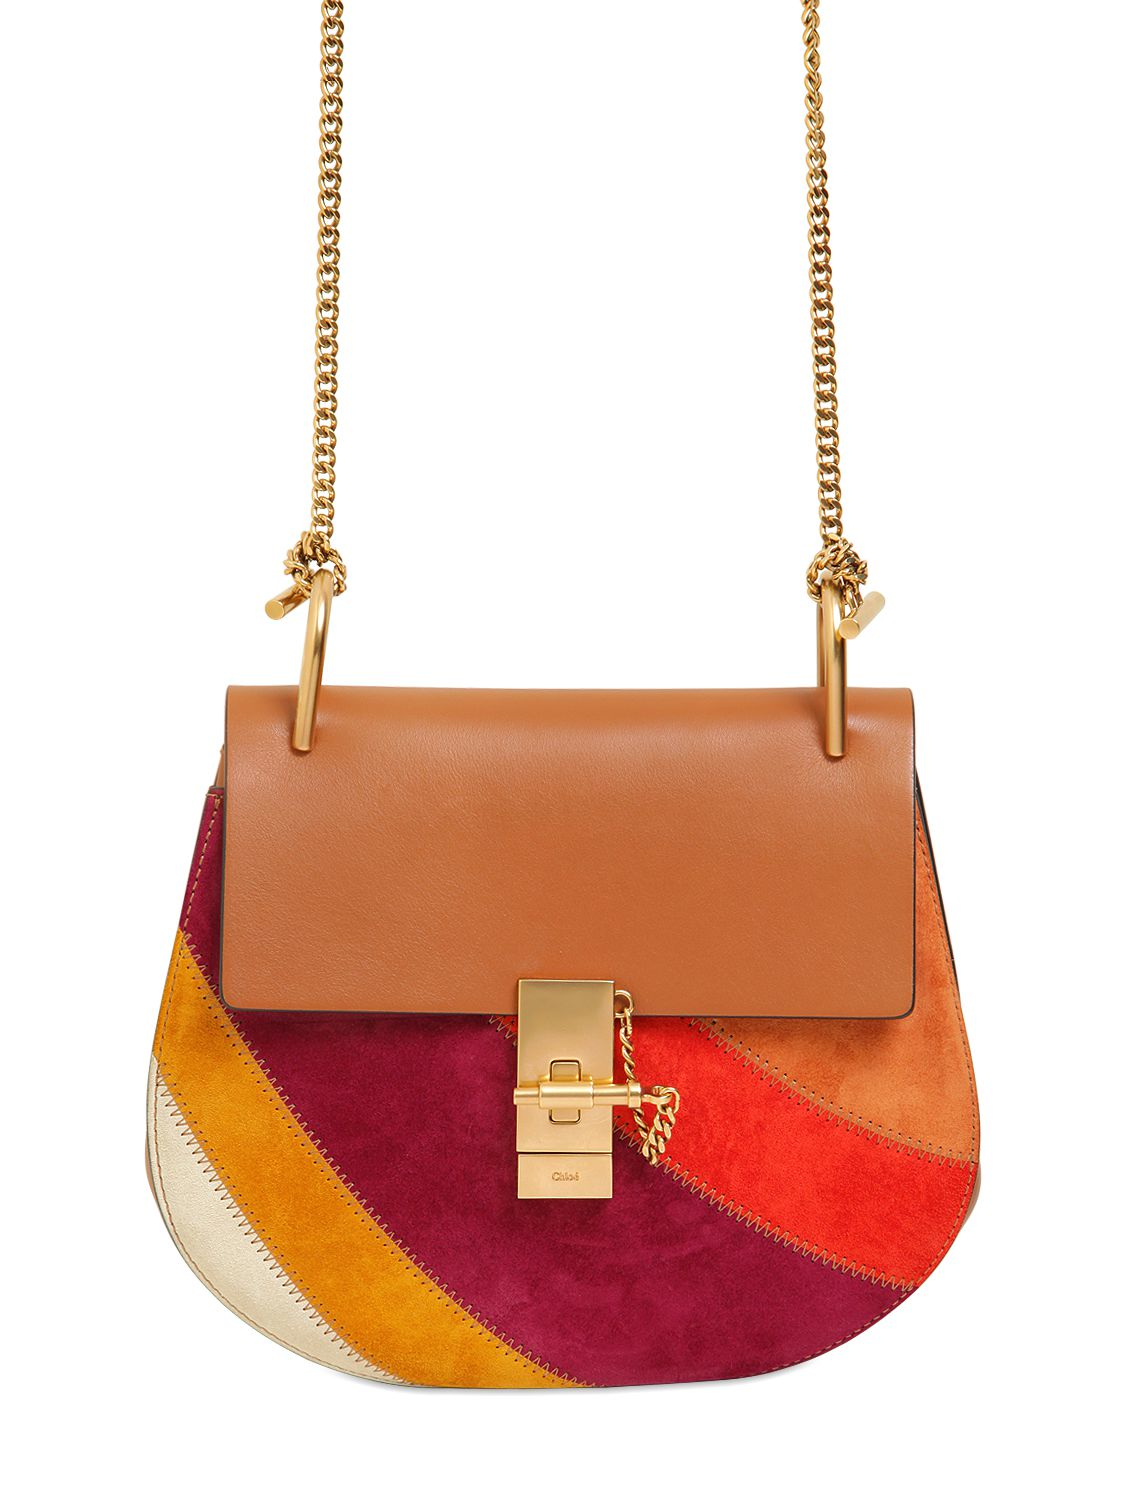 Chlo Small Drew Rainbow Patchwork Suede Bag in Red (BROWN) | Lyst